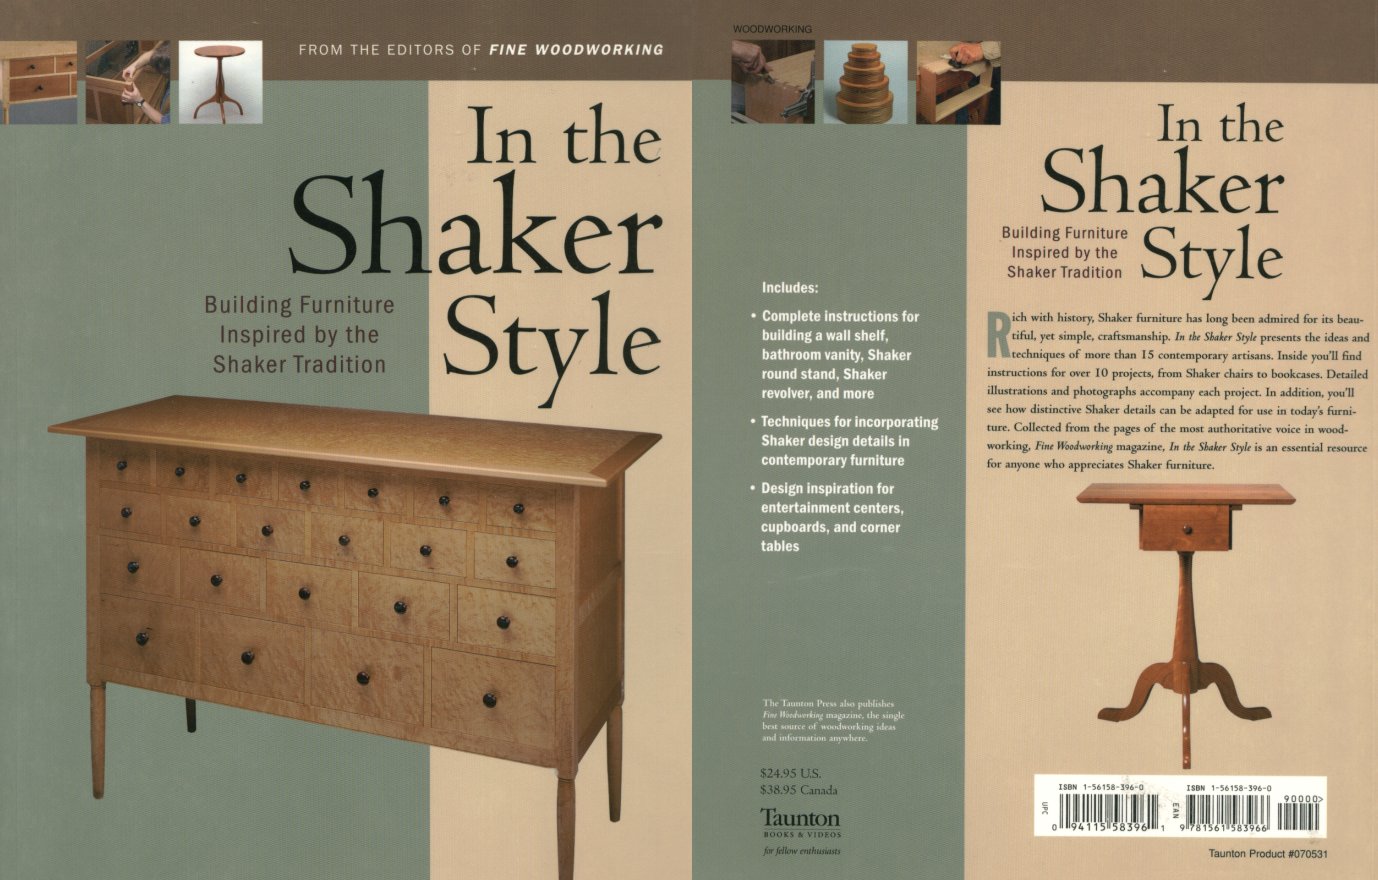 in-the-shaker-style-ed-fine-woodworking.jpg